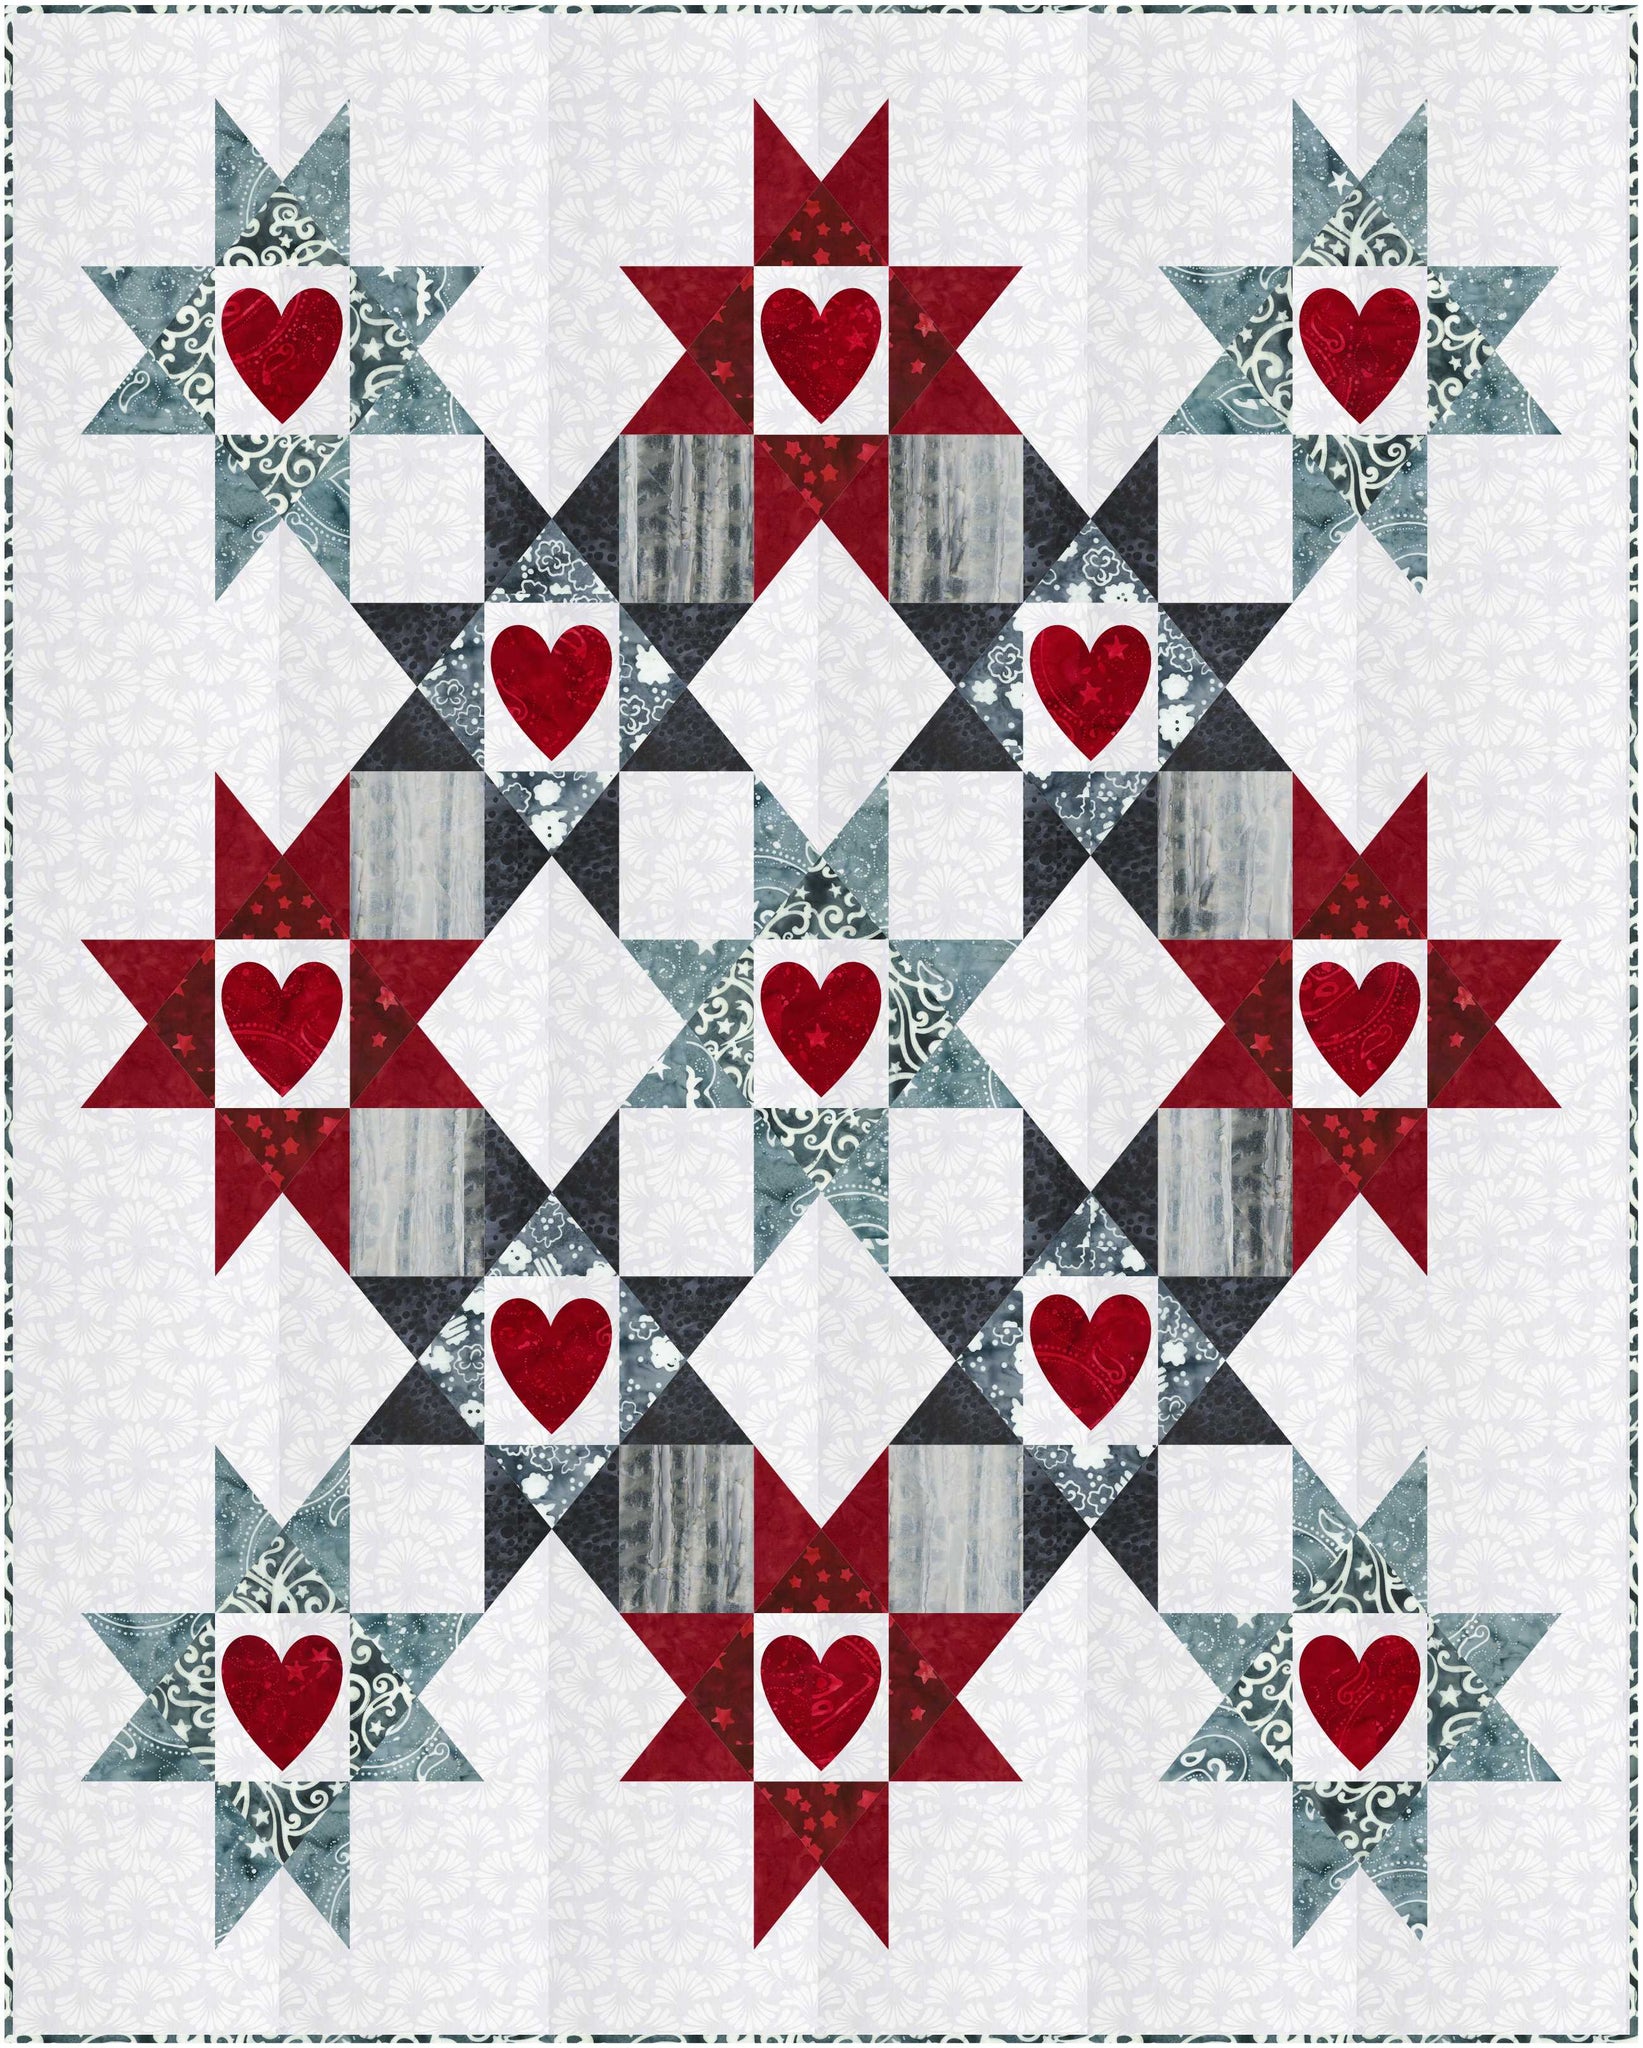 For the Brave – Patti's Patchwork